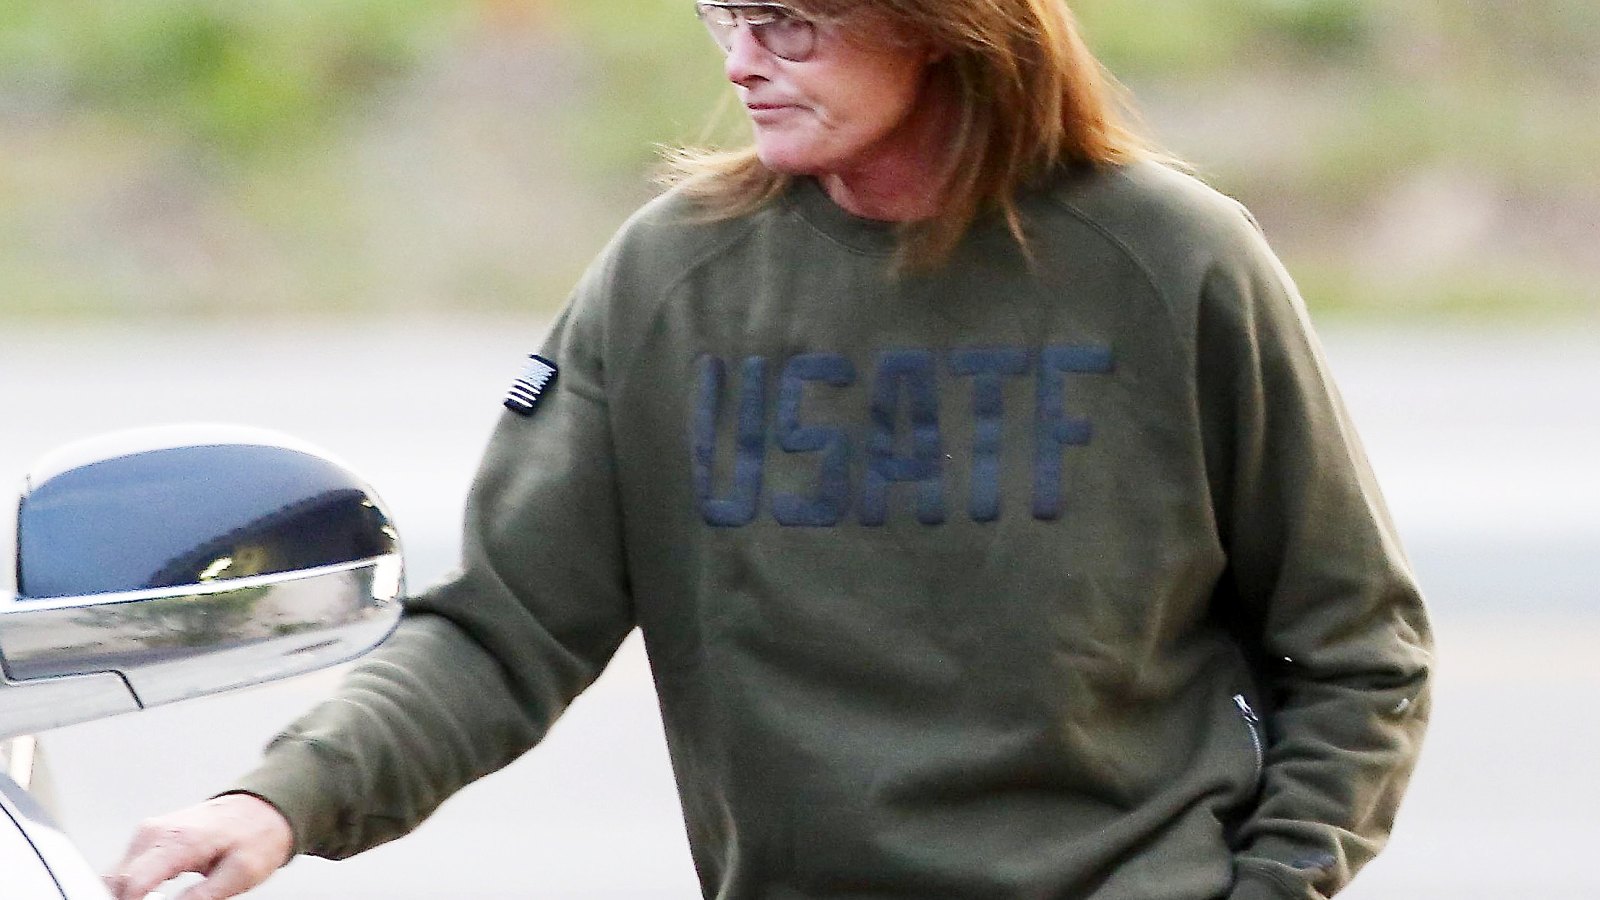 Bruce Jenner with his hair down on January 7, 2015